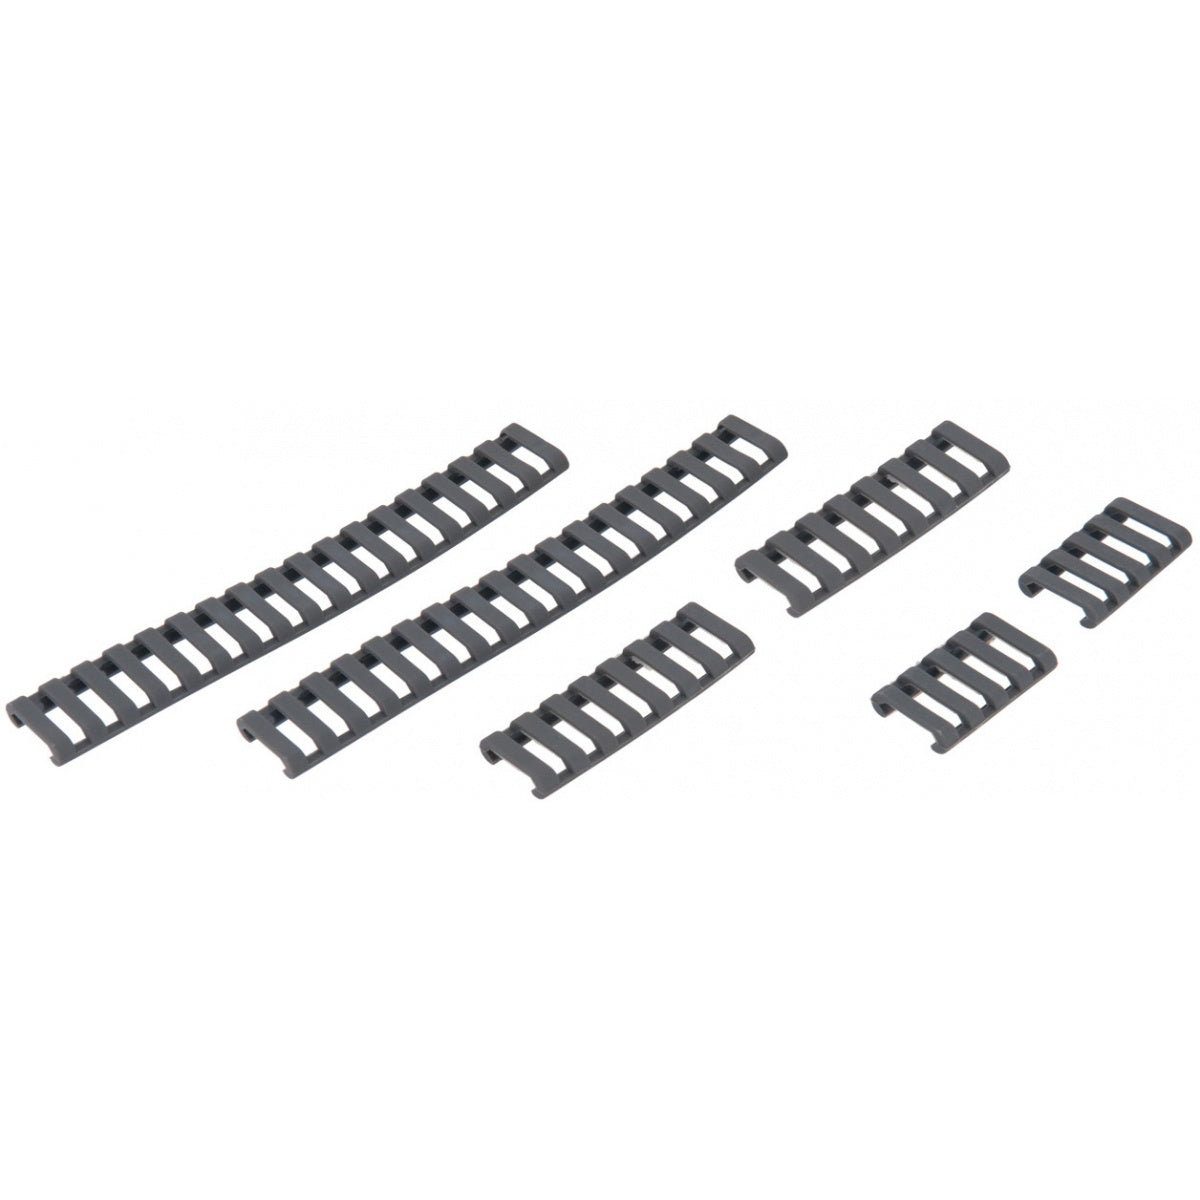 Airsoft Ladder Rail Panel for 20mm Rail Set of 6 - ssairsoft.com